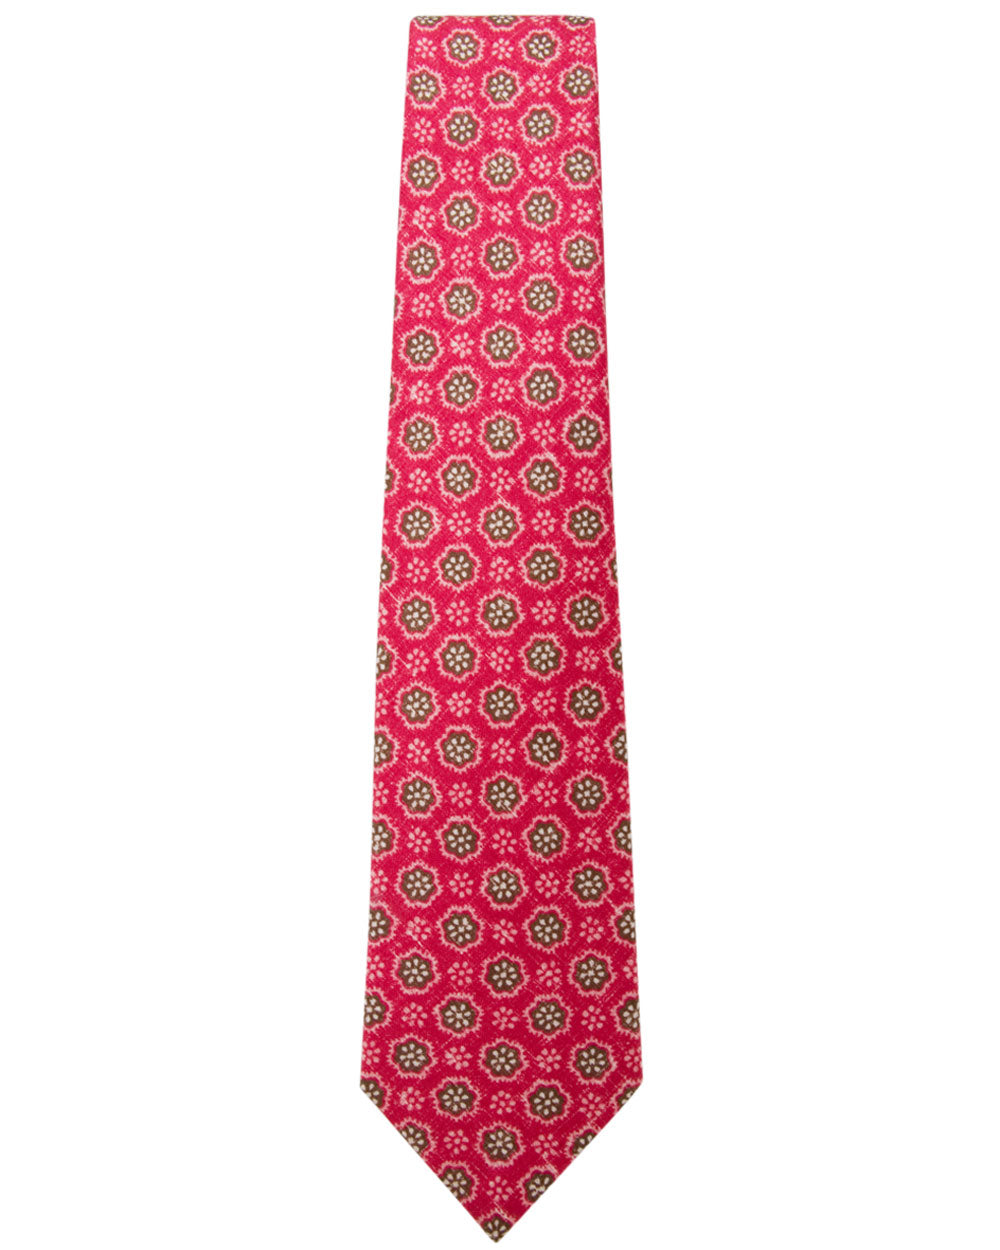 Berry and Brown Floral Tie